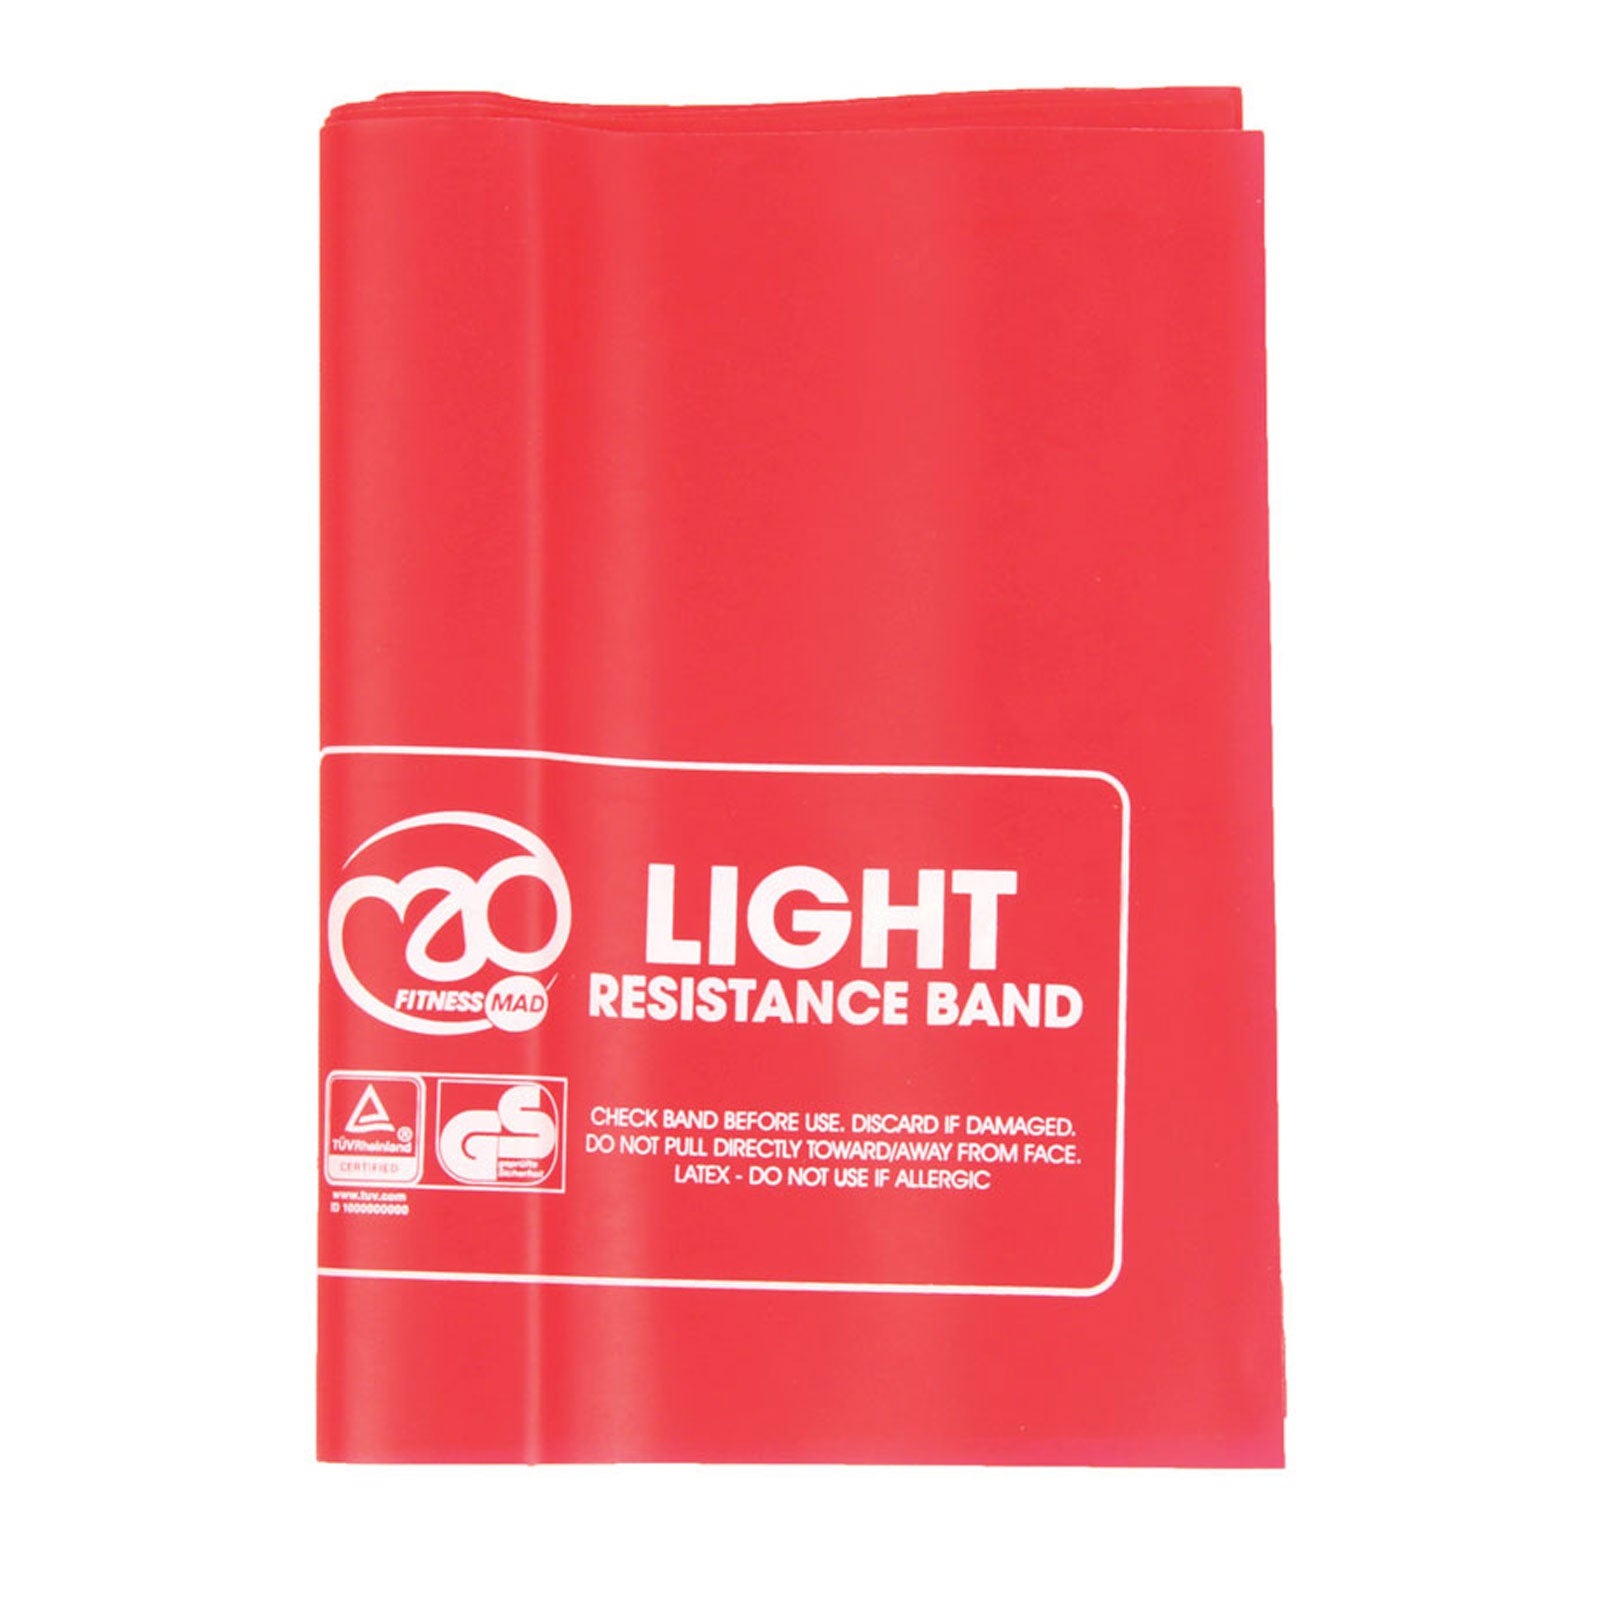 Fitness MAD Resistance Band Light Red Resistance Band Alternate 2